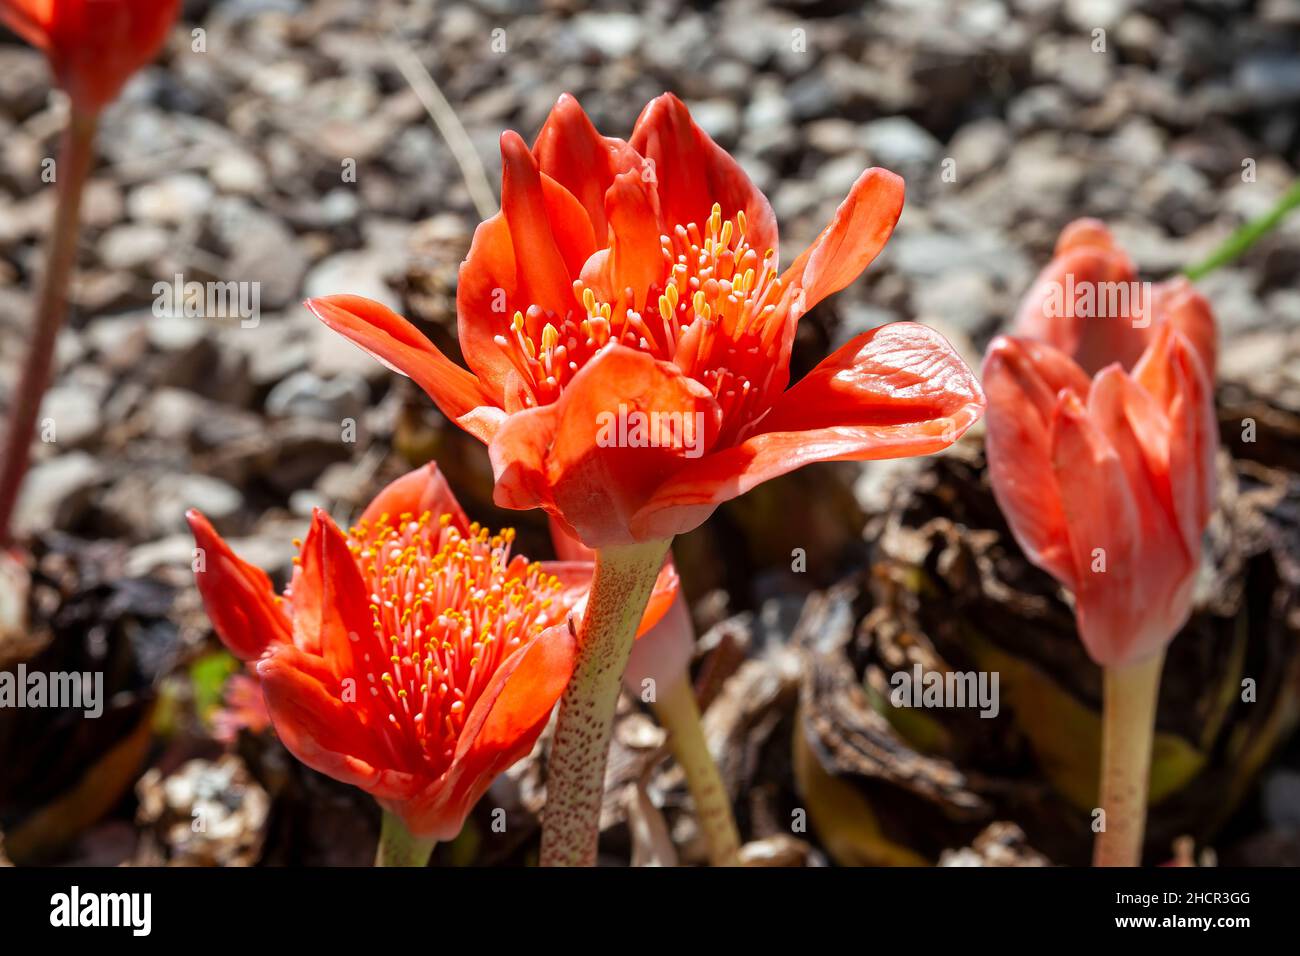 Haemanthus coccineus a red bulbous spring summer perennial summer flower plant commonly known as blood flower, blood lily or paintbrush lily, stock ph Stock Photo